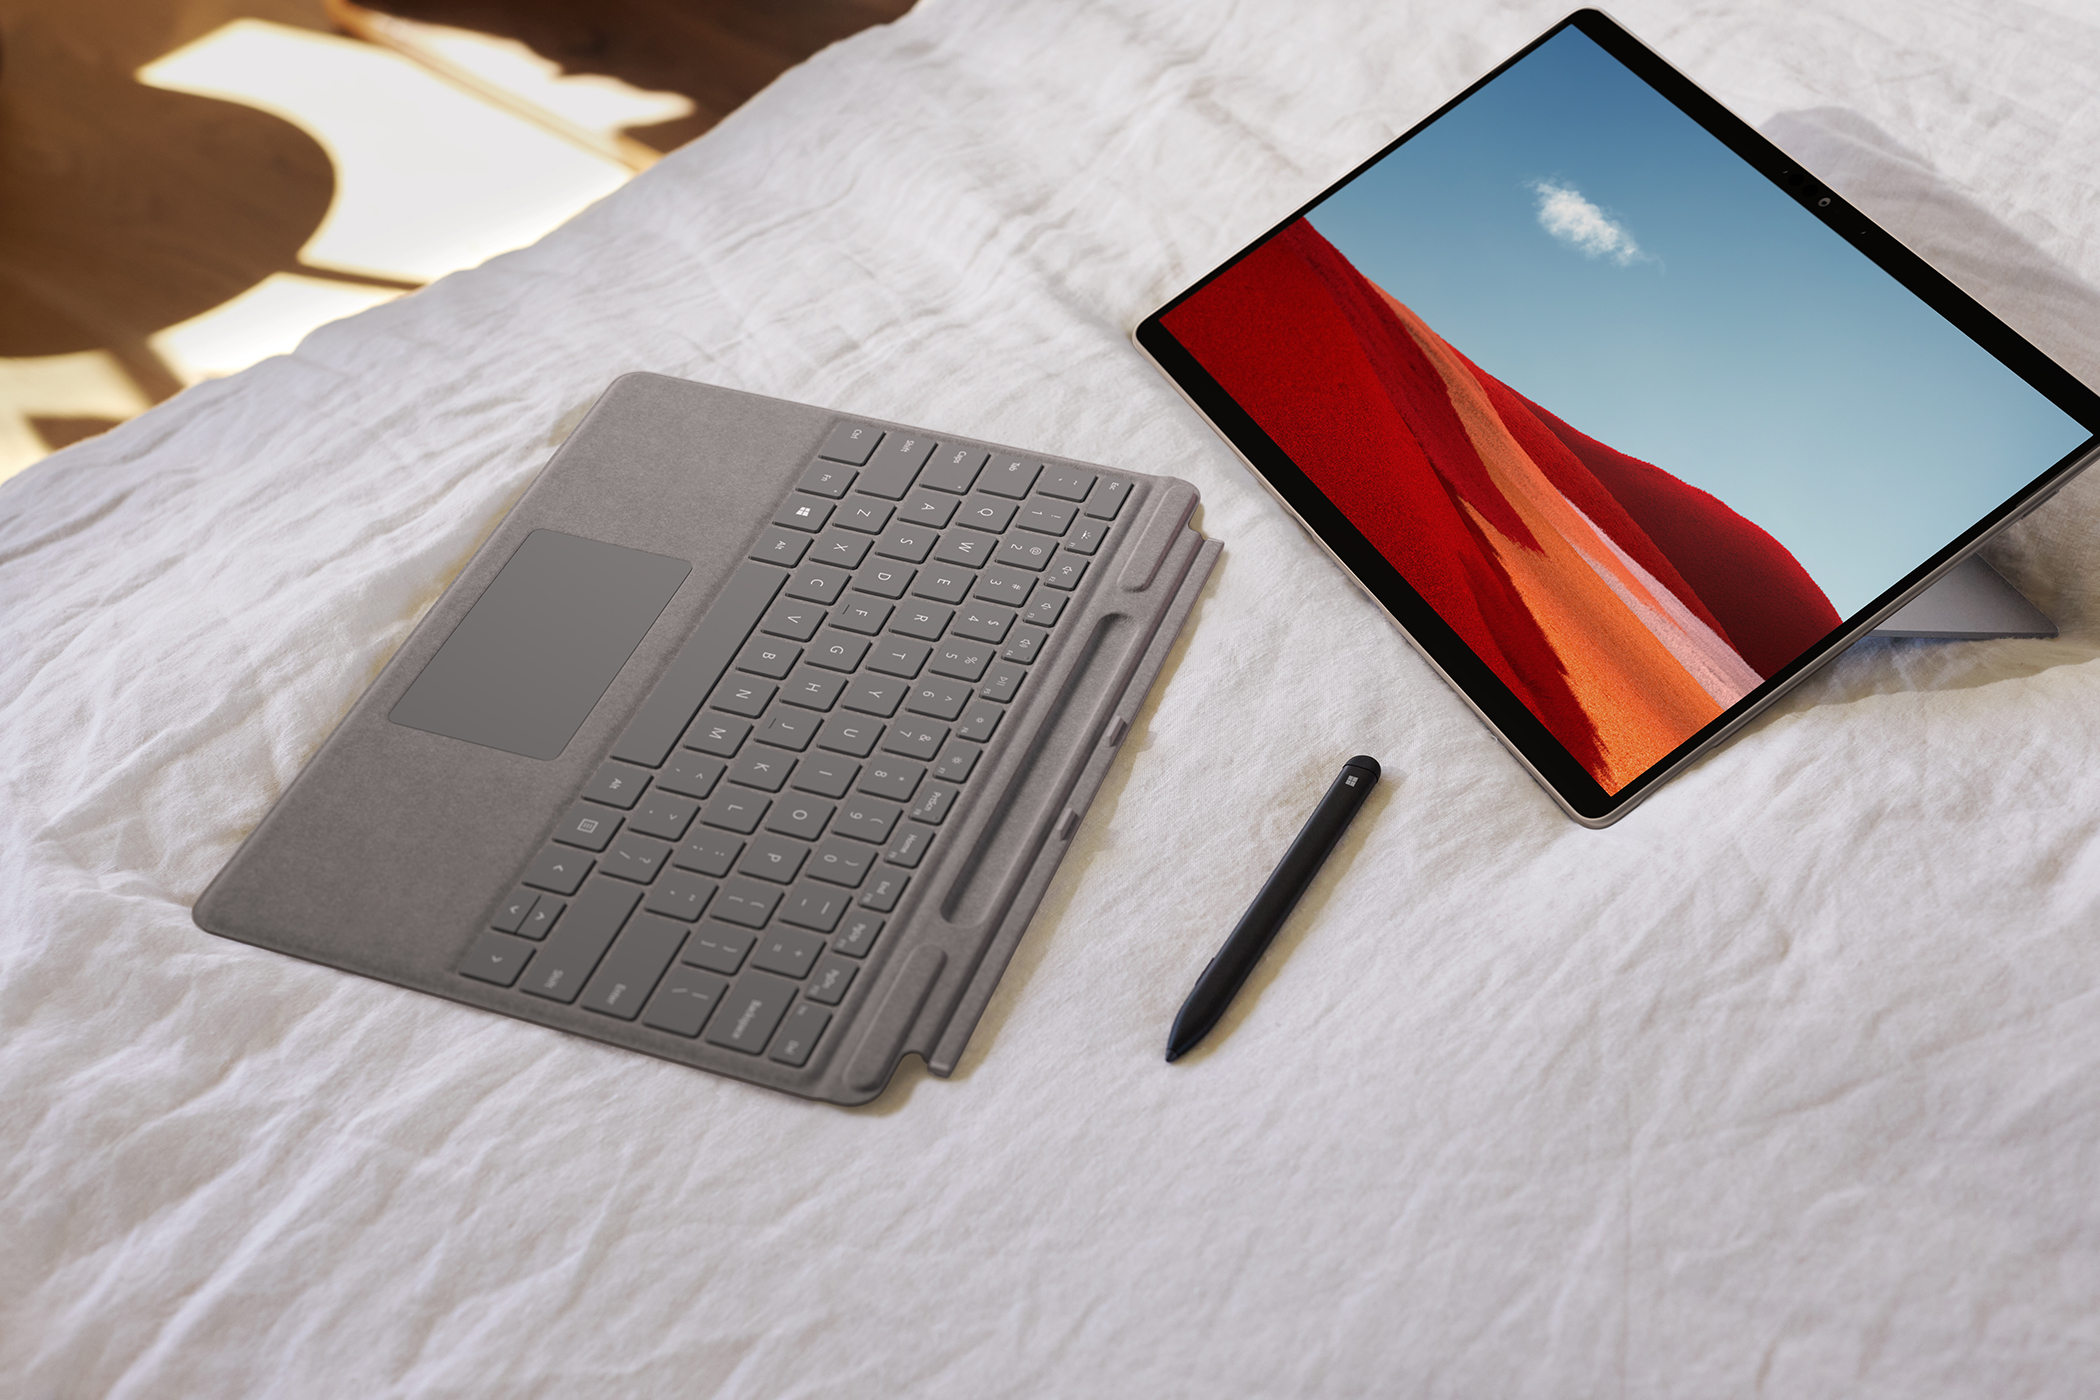 Microsoft's new Surface Pro X now available in India